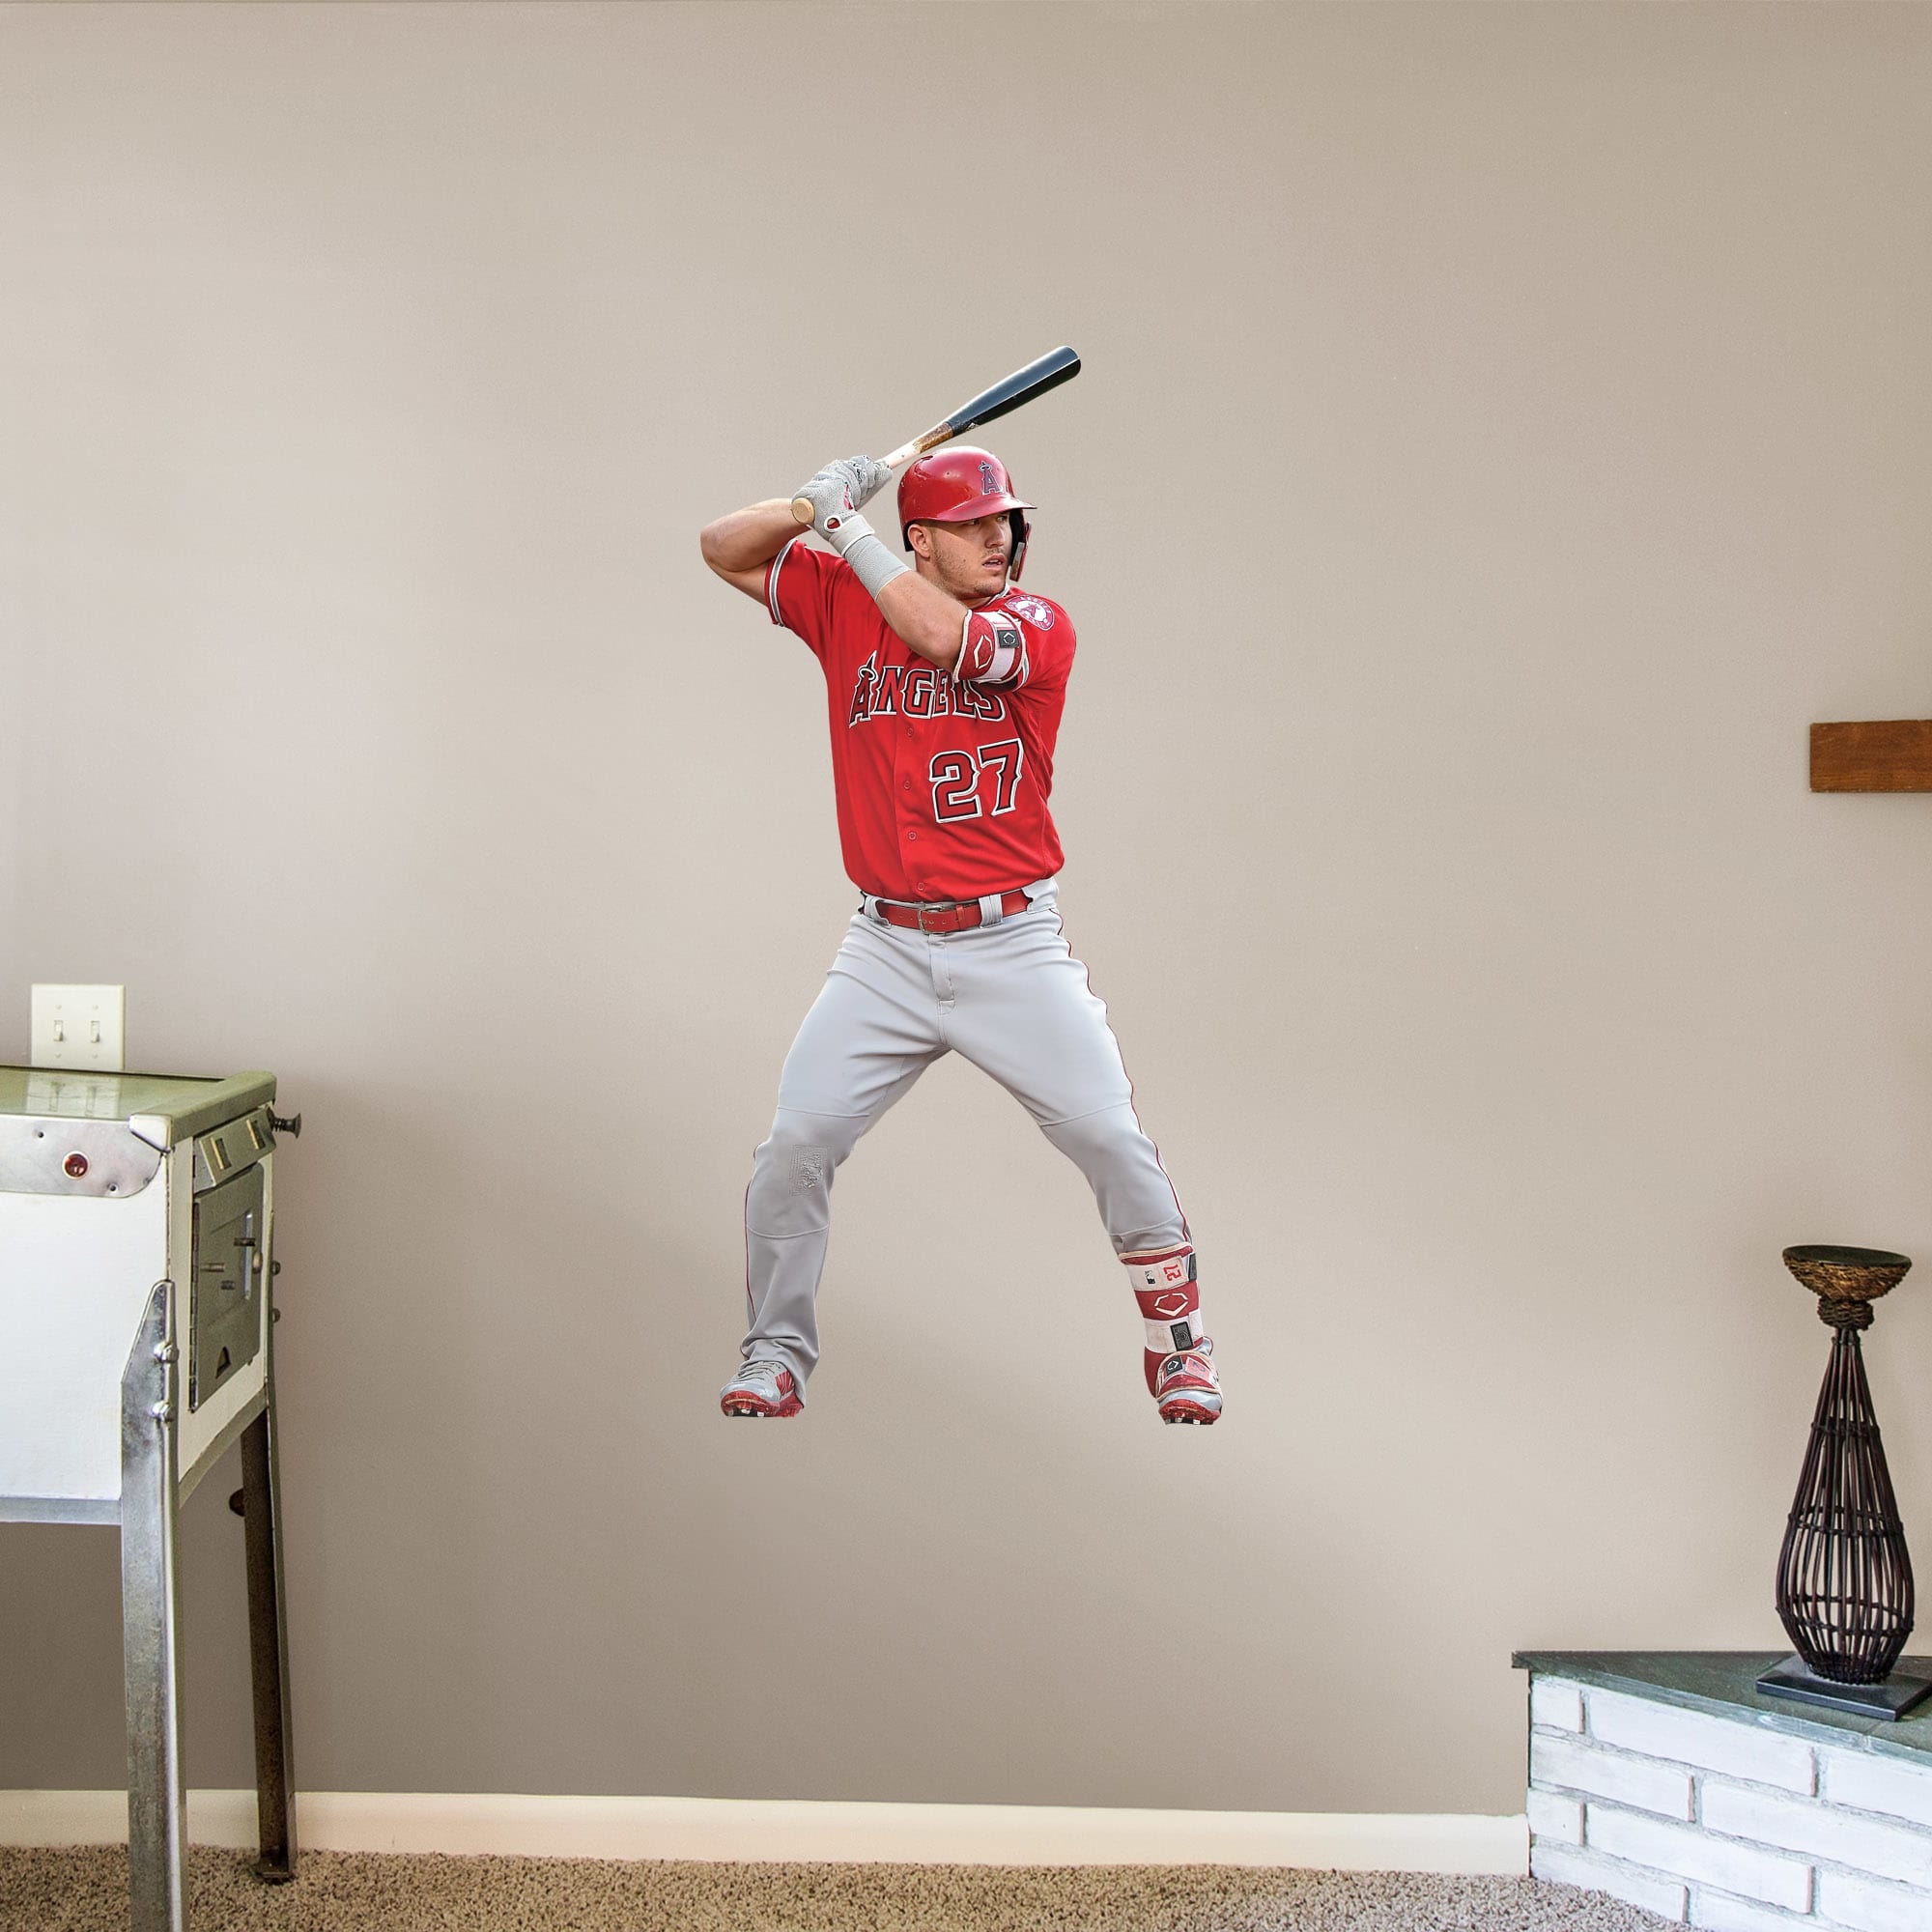 Mike Trout for LA Angels: At Bat - Officially Licensed MLB Removable Wall Decal Giant Athlete + 2 Decals (25"W x 51"H) by Fathea